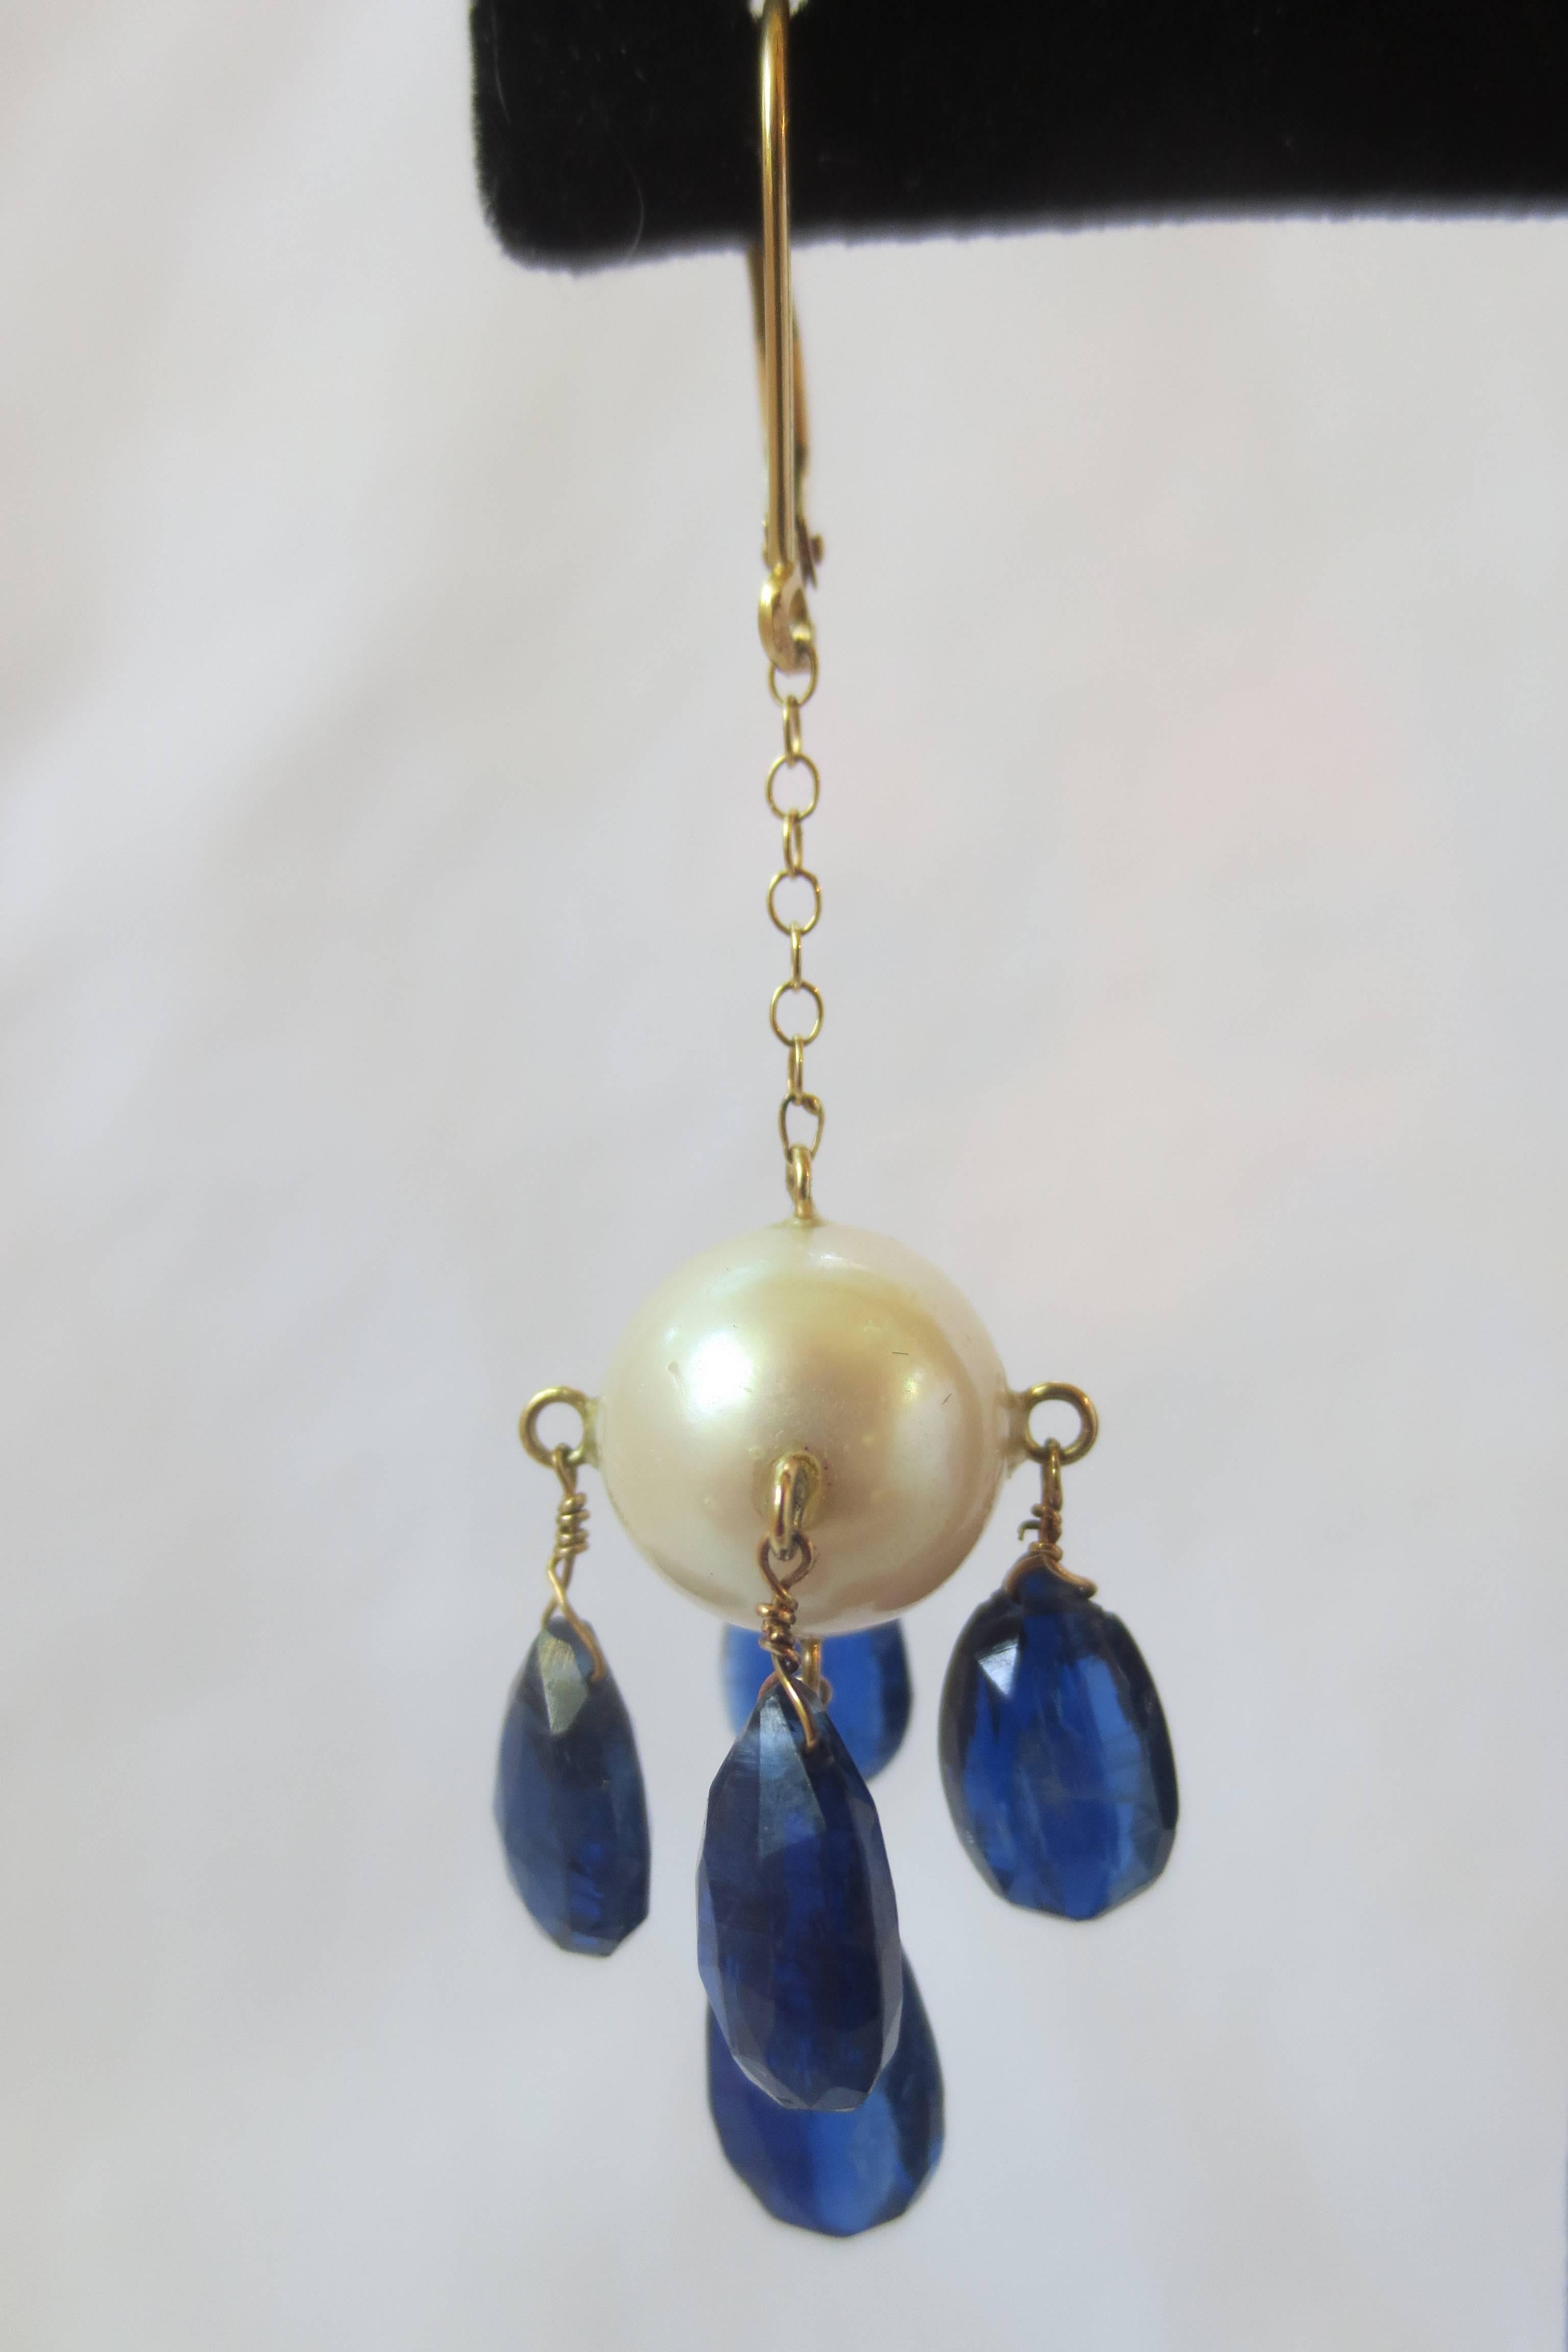 Briolette Cut Marina j Pearl and Kyanite Briolettes Dangle Earrings on a 14K Yellow Gold Chain